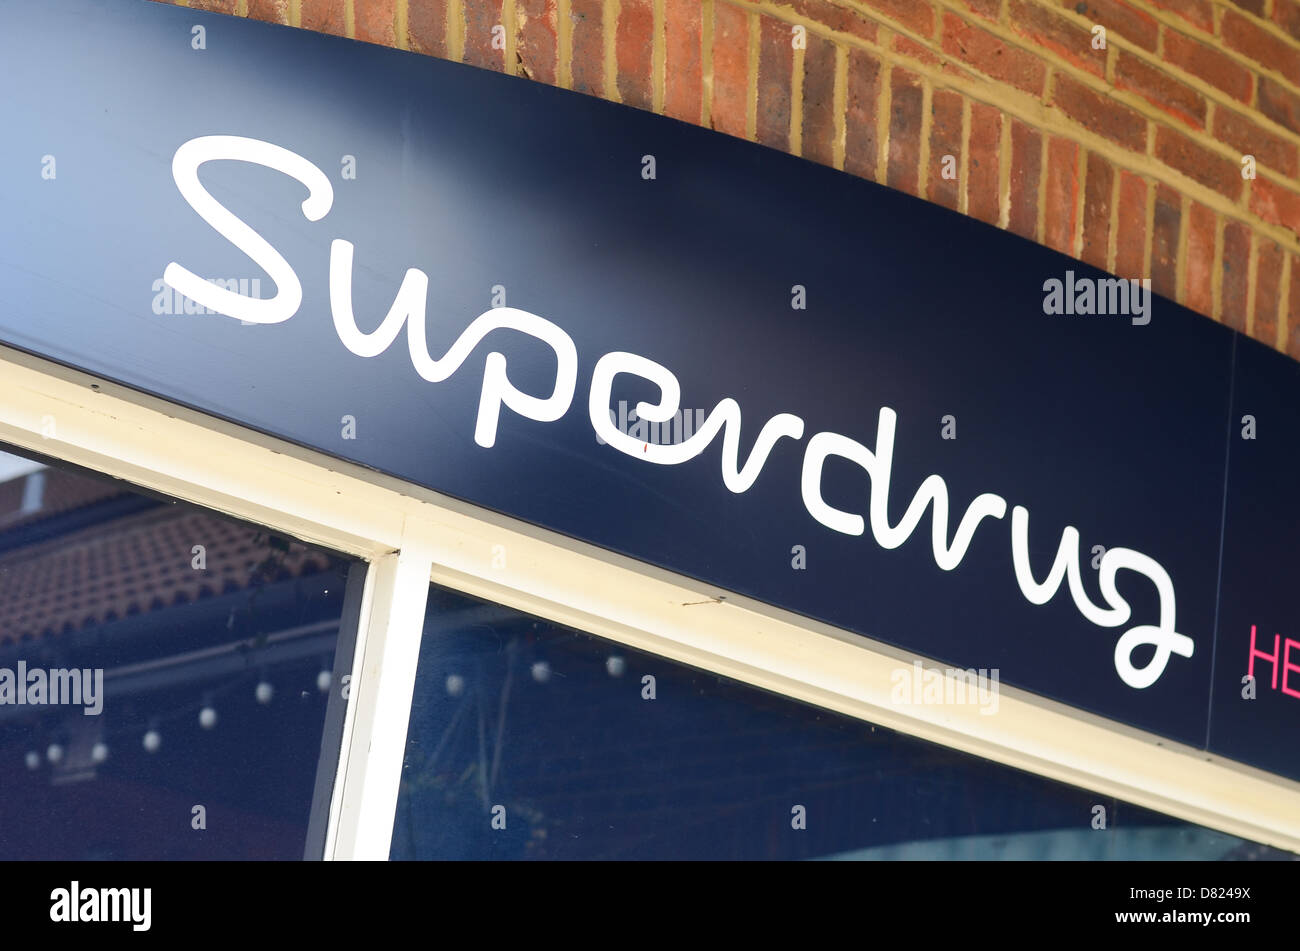 Superdrug, a British health and beauty retailer. Stock Photo